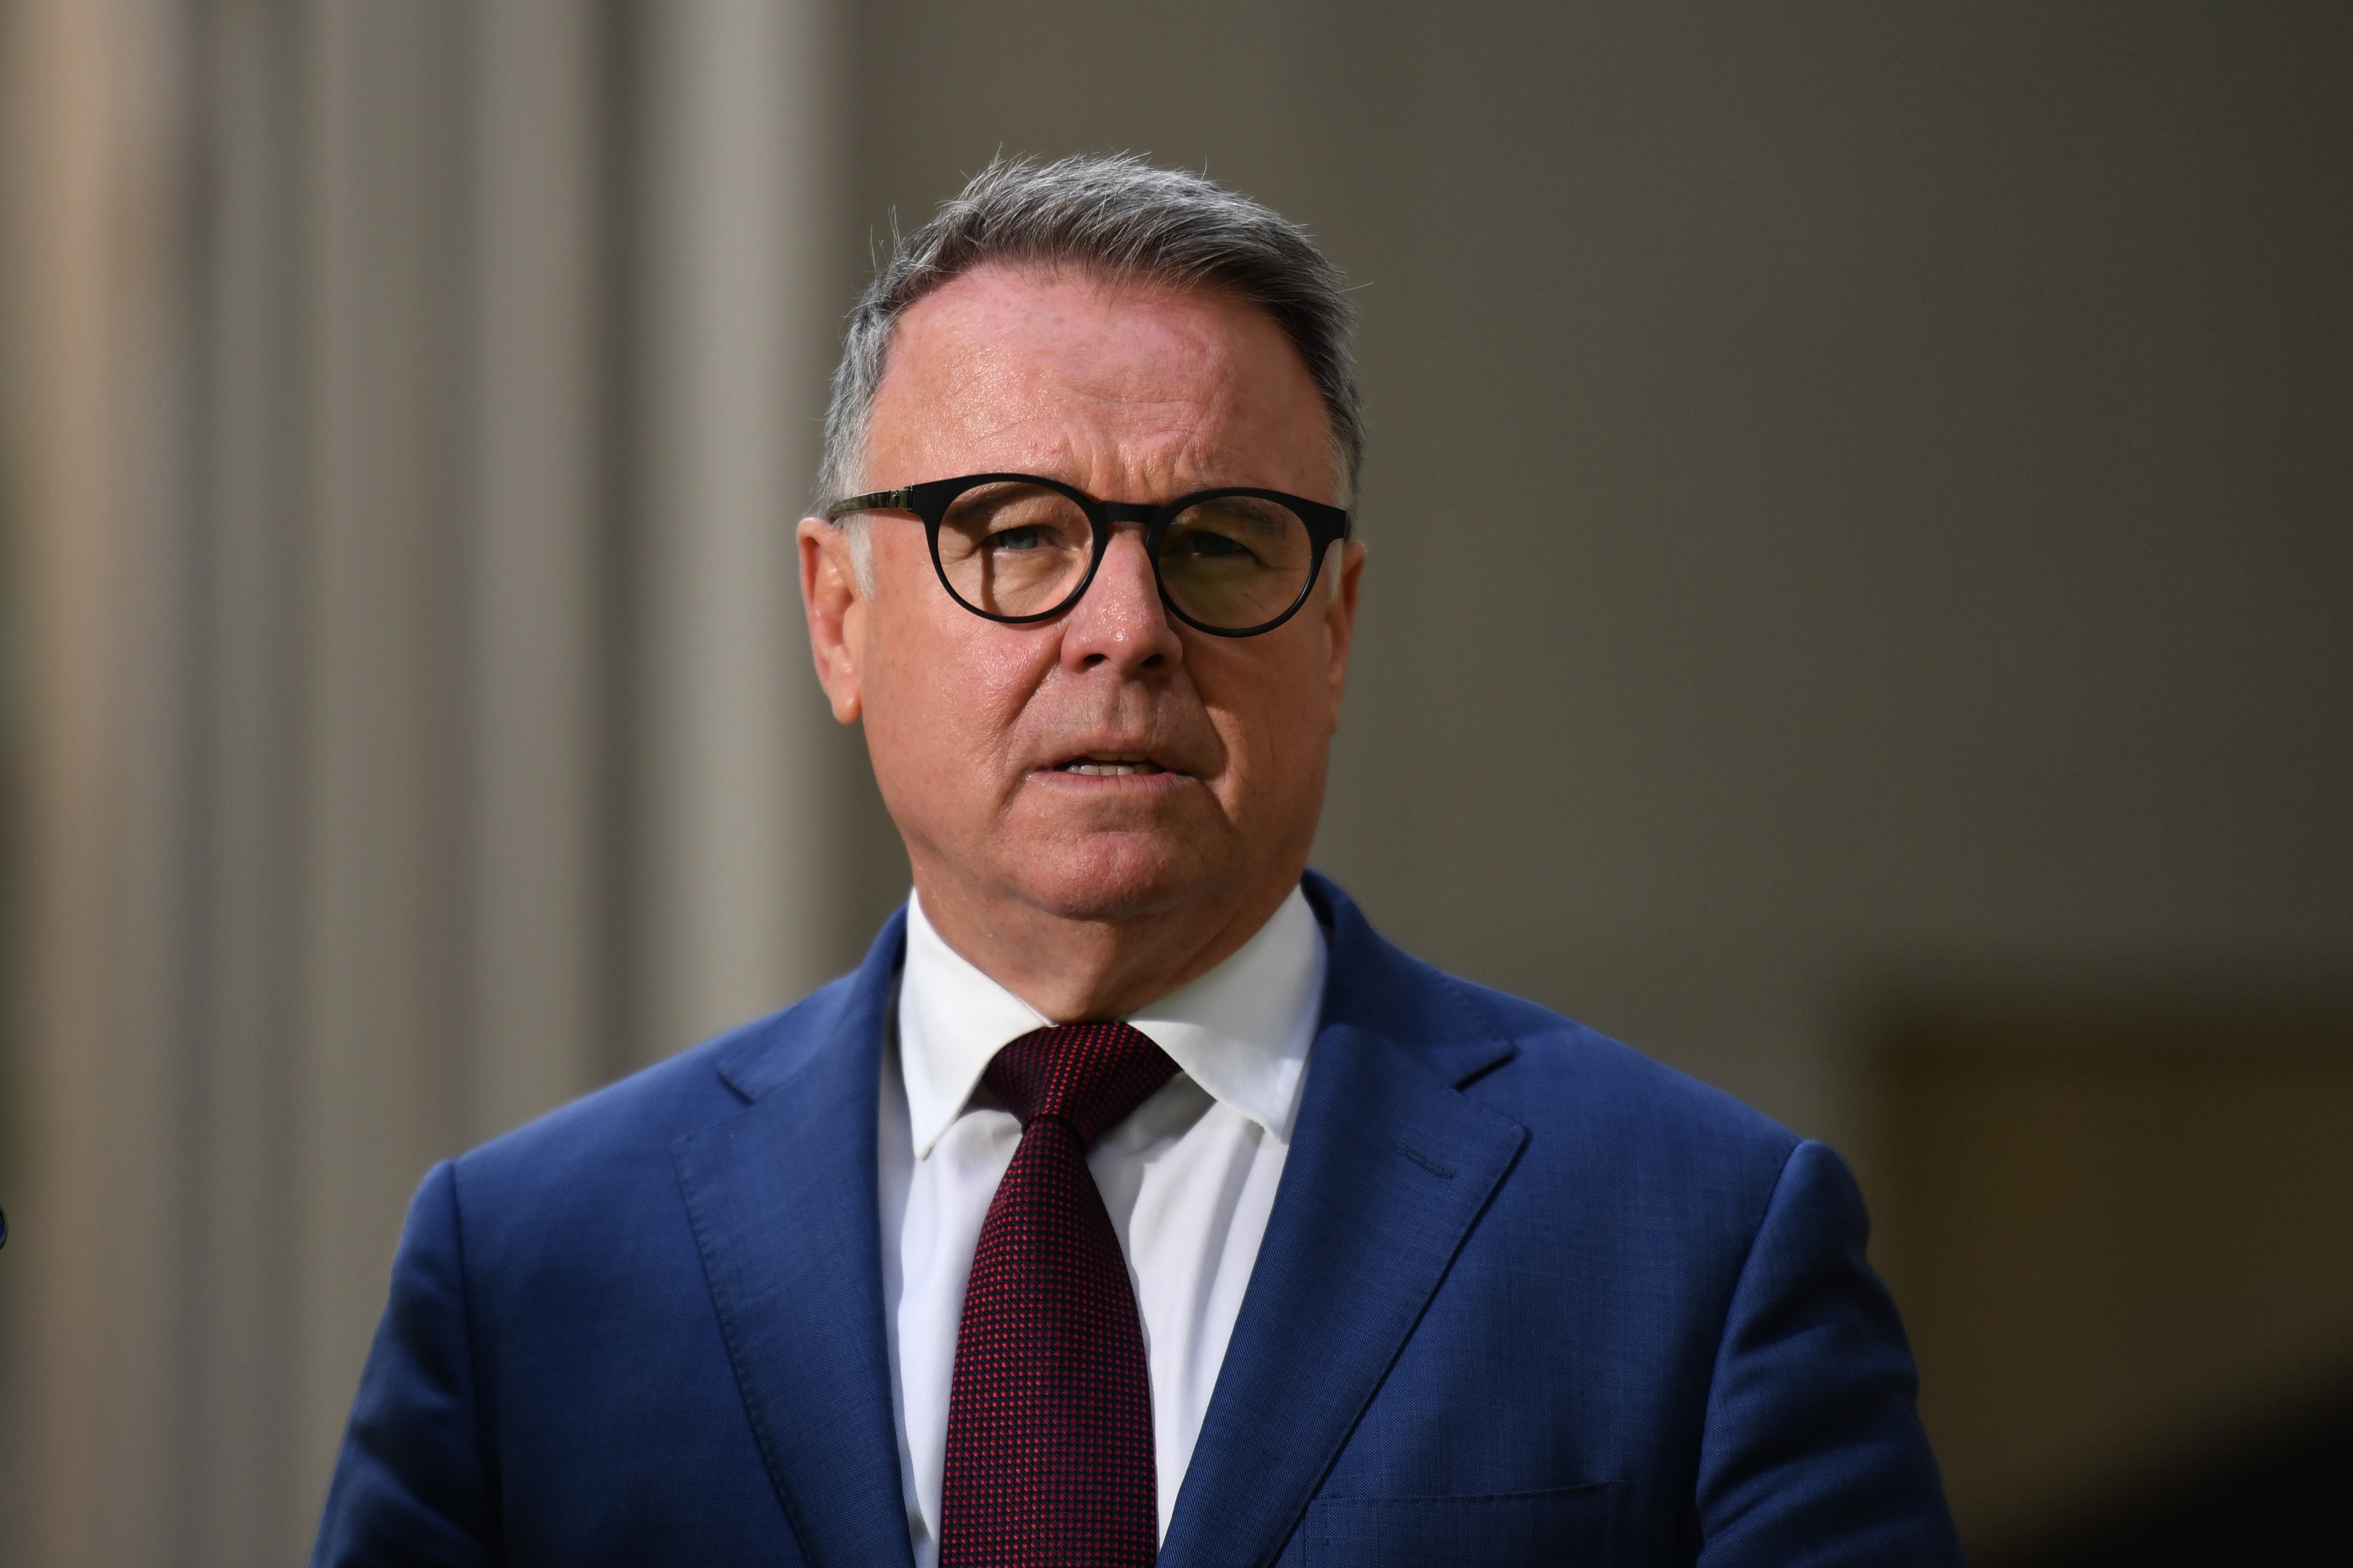 Labor's agriculture spokesman Joel Fitzgibbon at a press conference at Parliament House in Canberra, Monday, December 2, 2019.